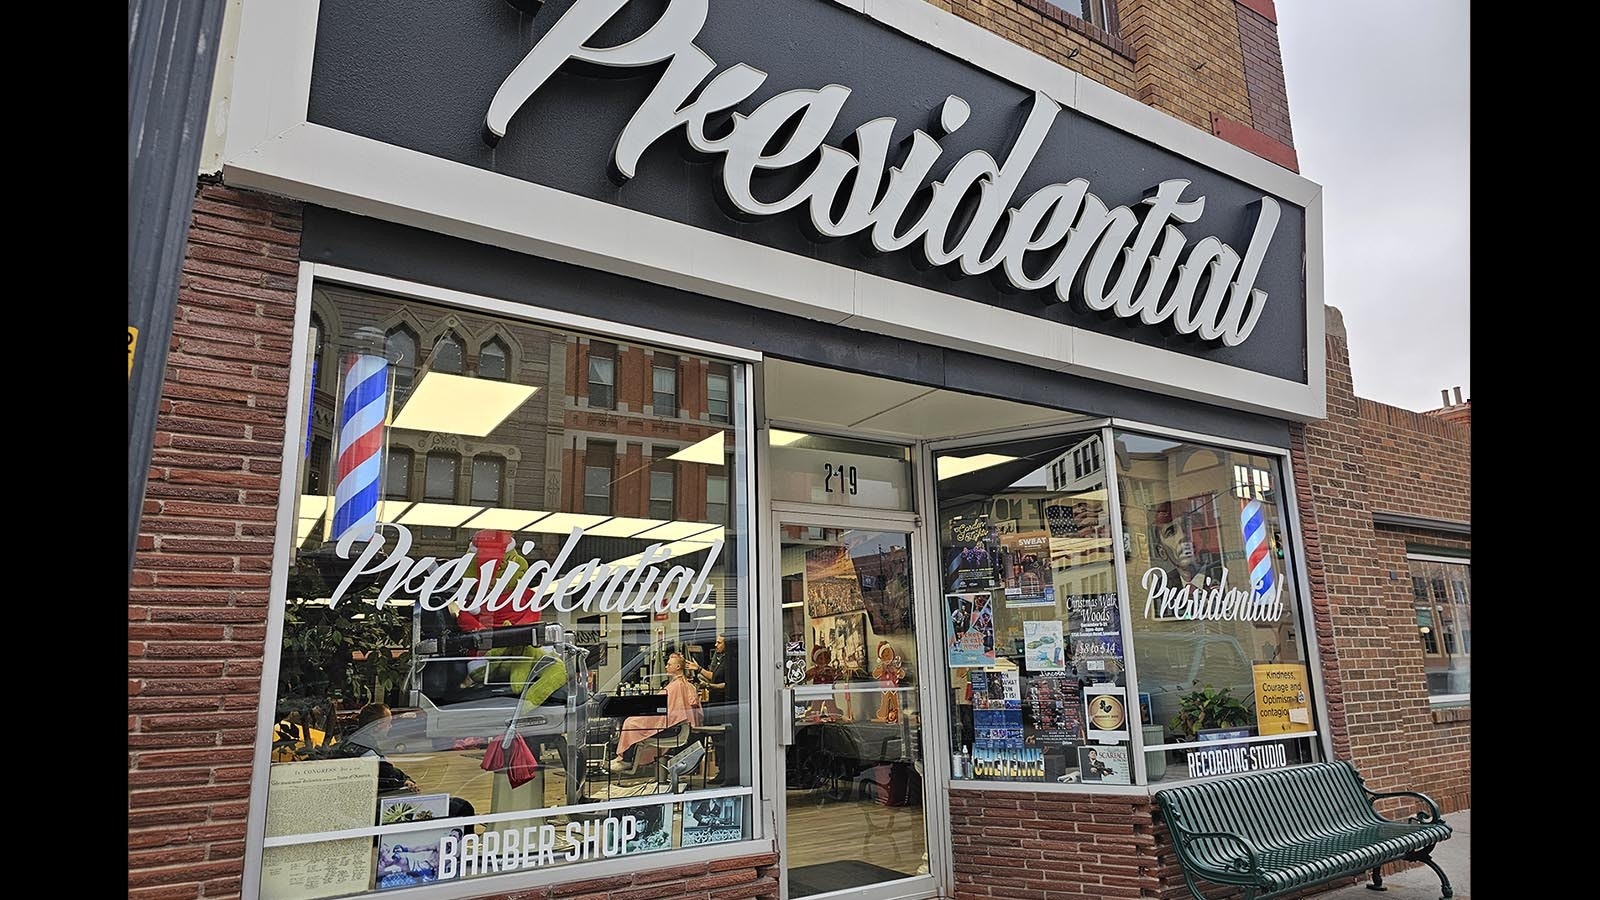 The Presidential Barbershop on West Lincolnway in Cheyenne.